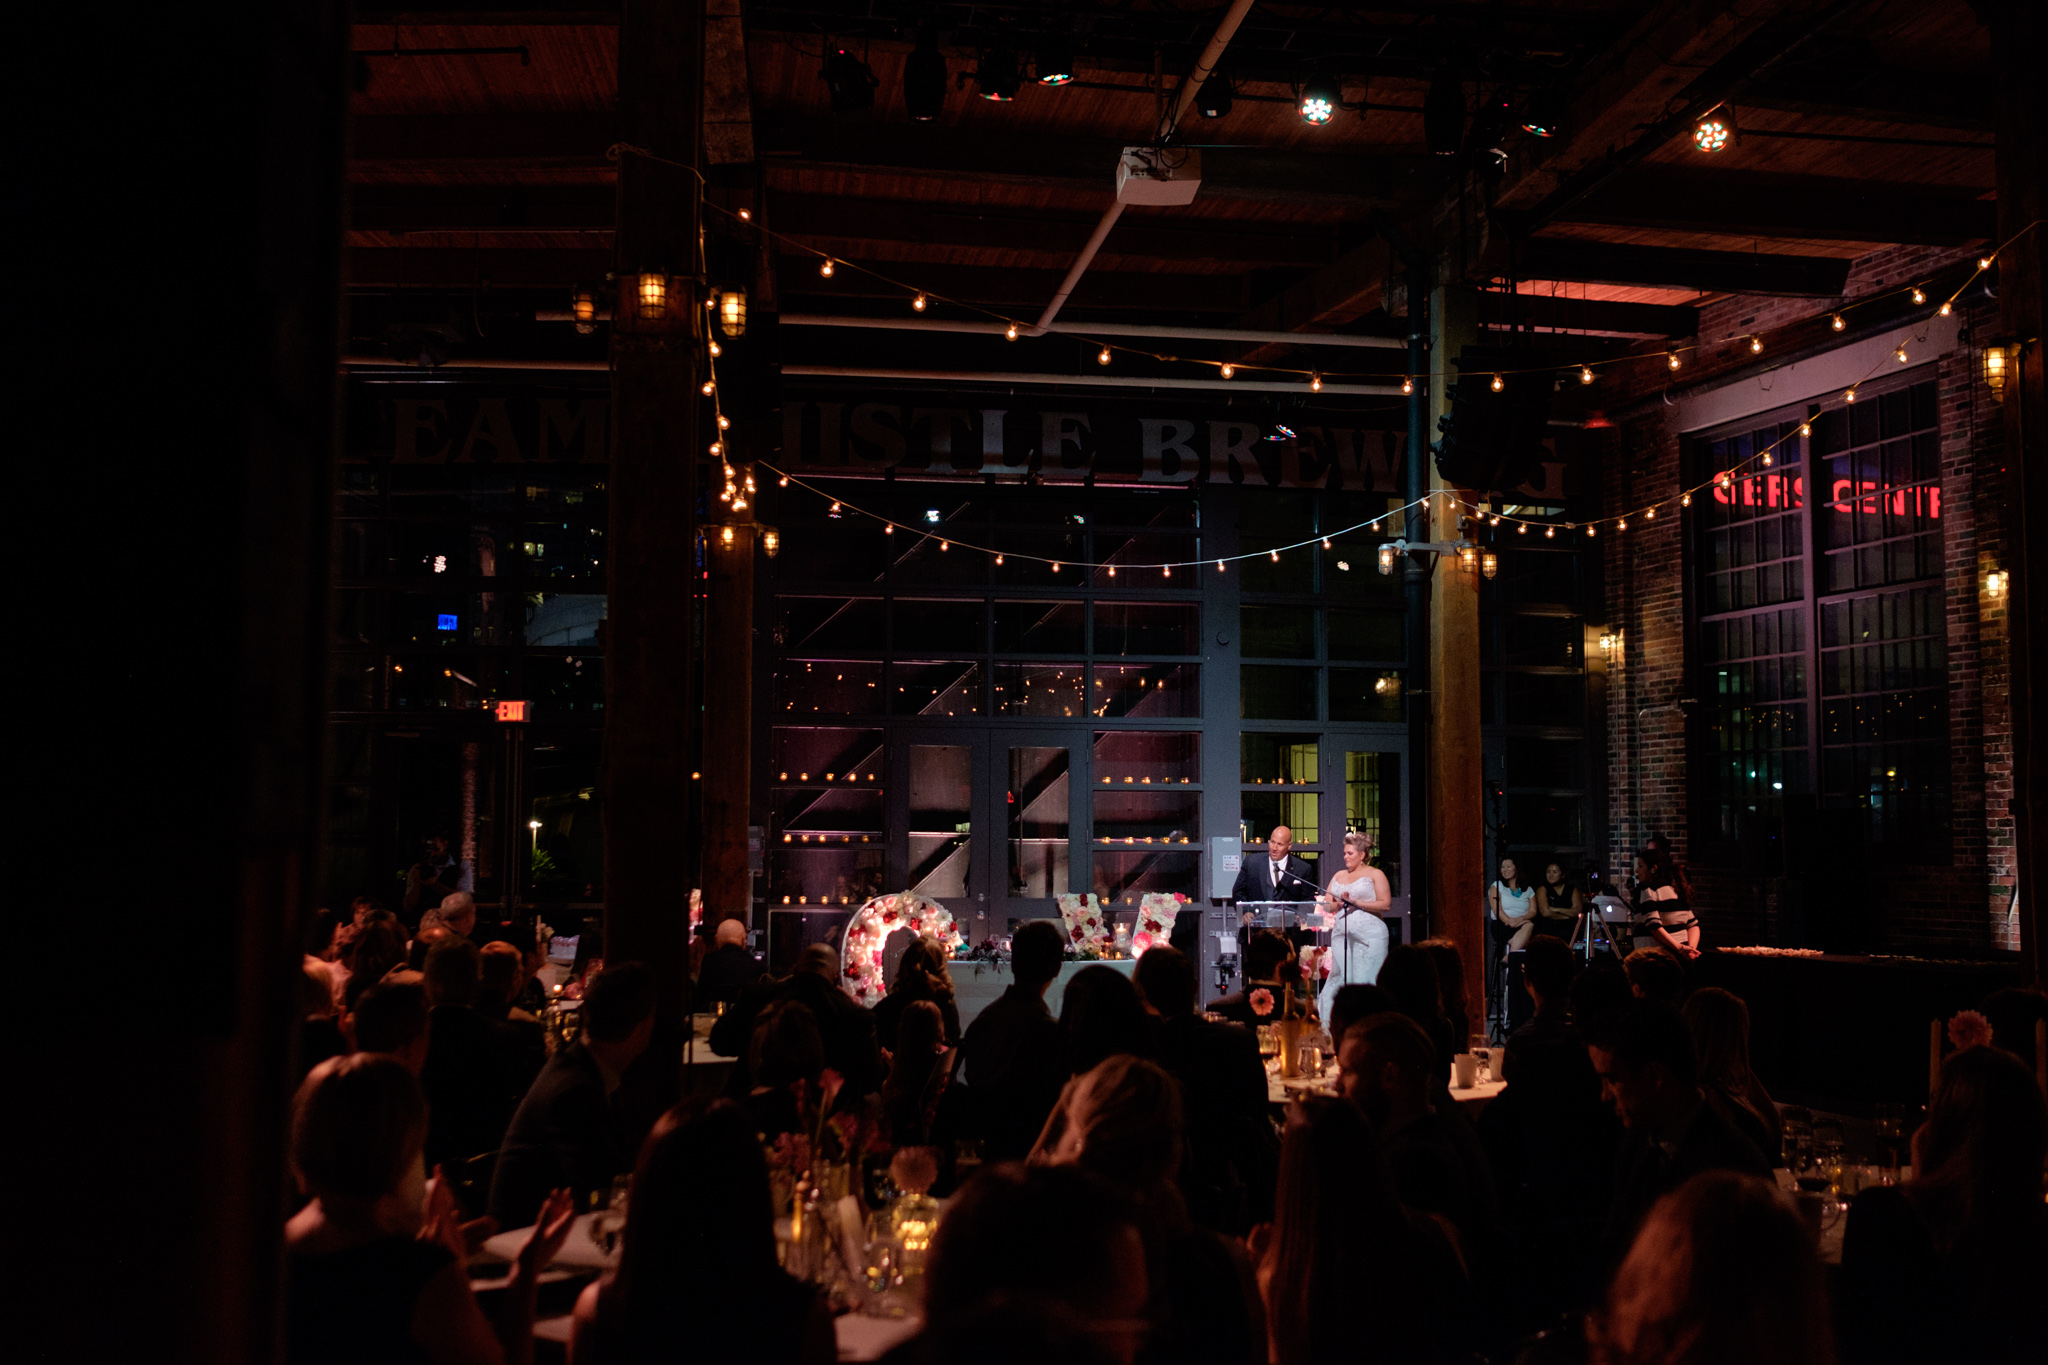  The bride and groom give their wedding speech to their guests during their reception at the SteamWhistle Brewery in Toronto.&nbsp; 